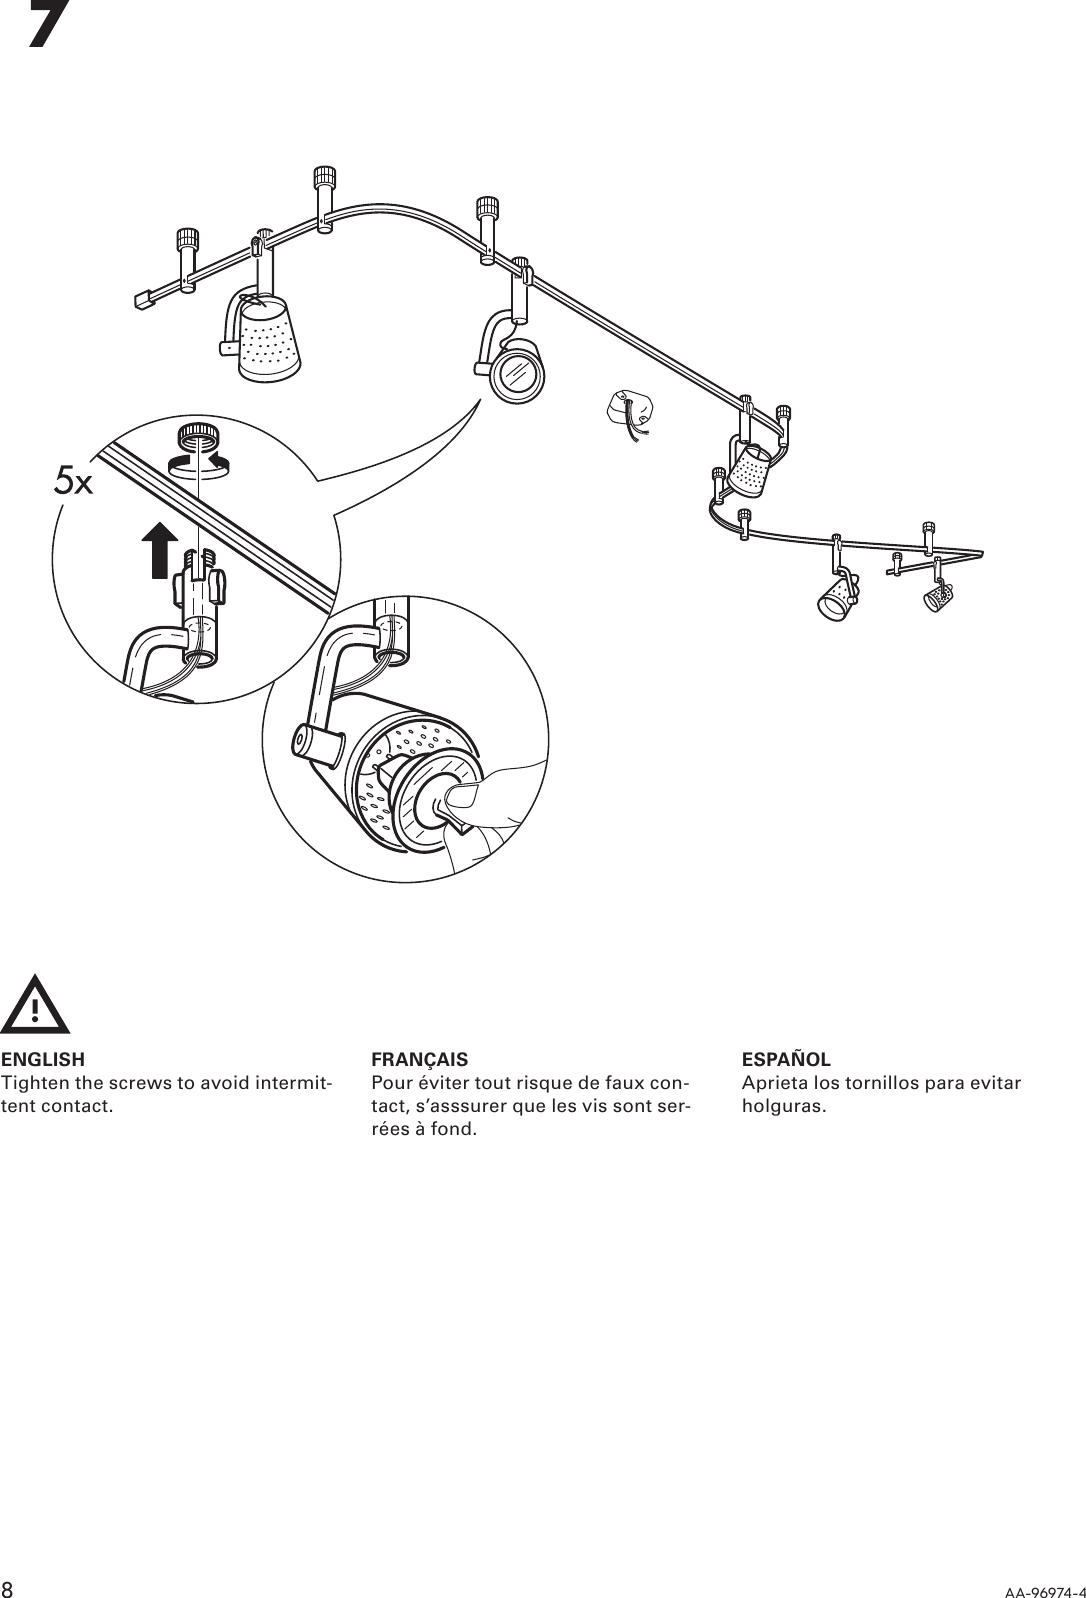 Page 8 of 12 - Ikea Ikea-Magnesium-Spotlight-System-Assembly-Instruction